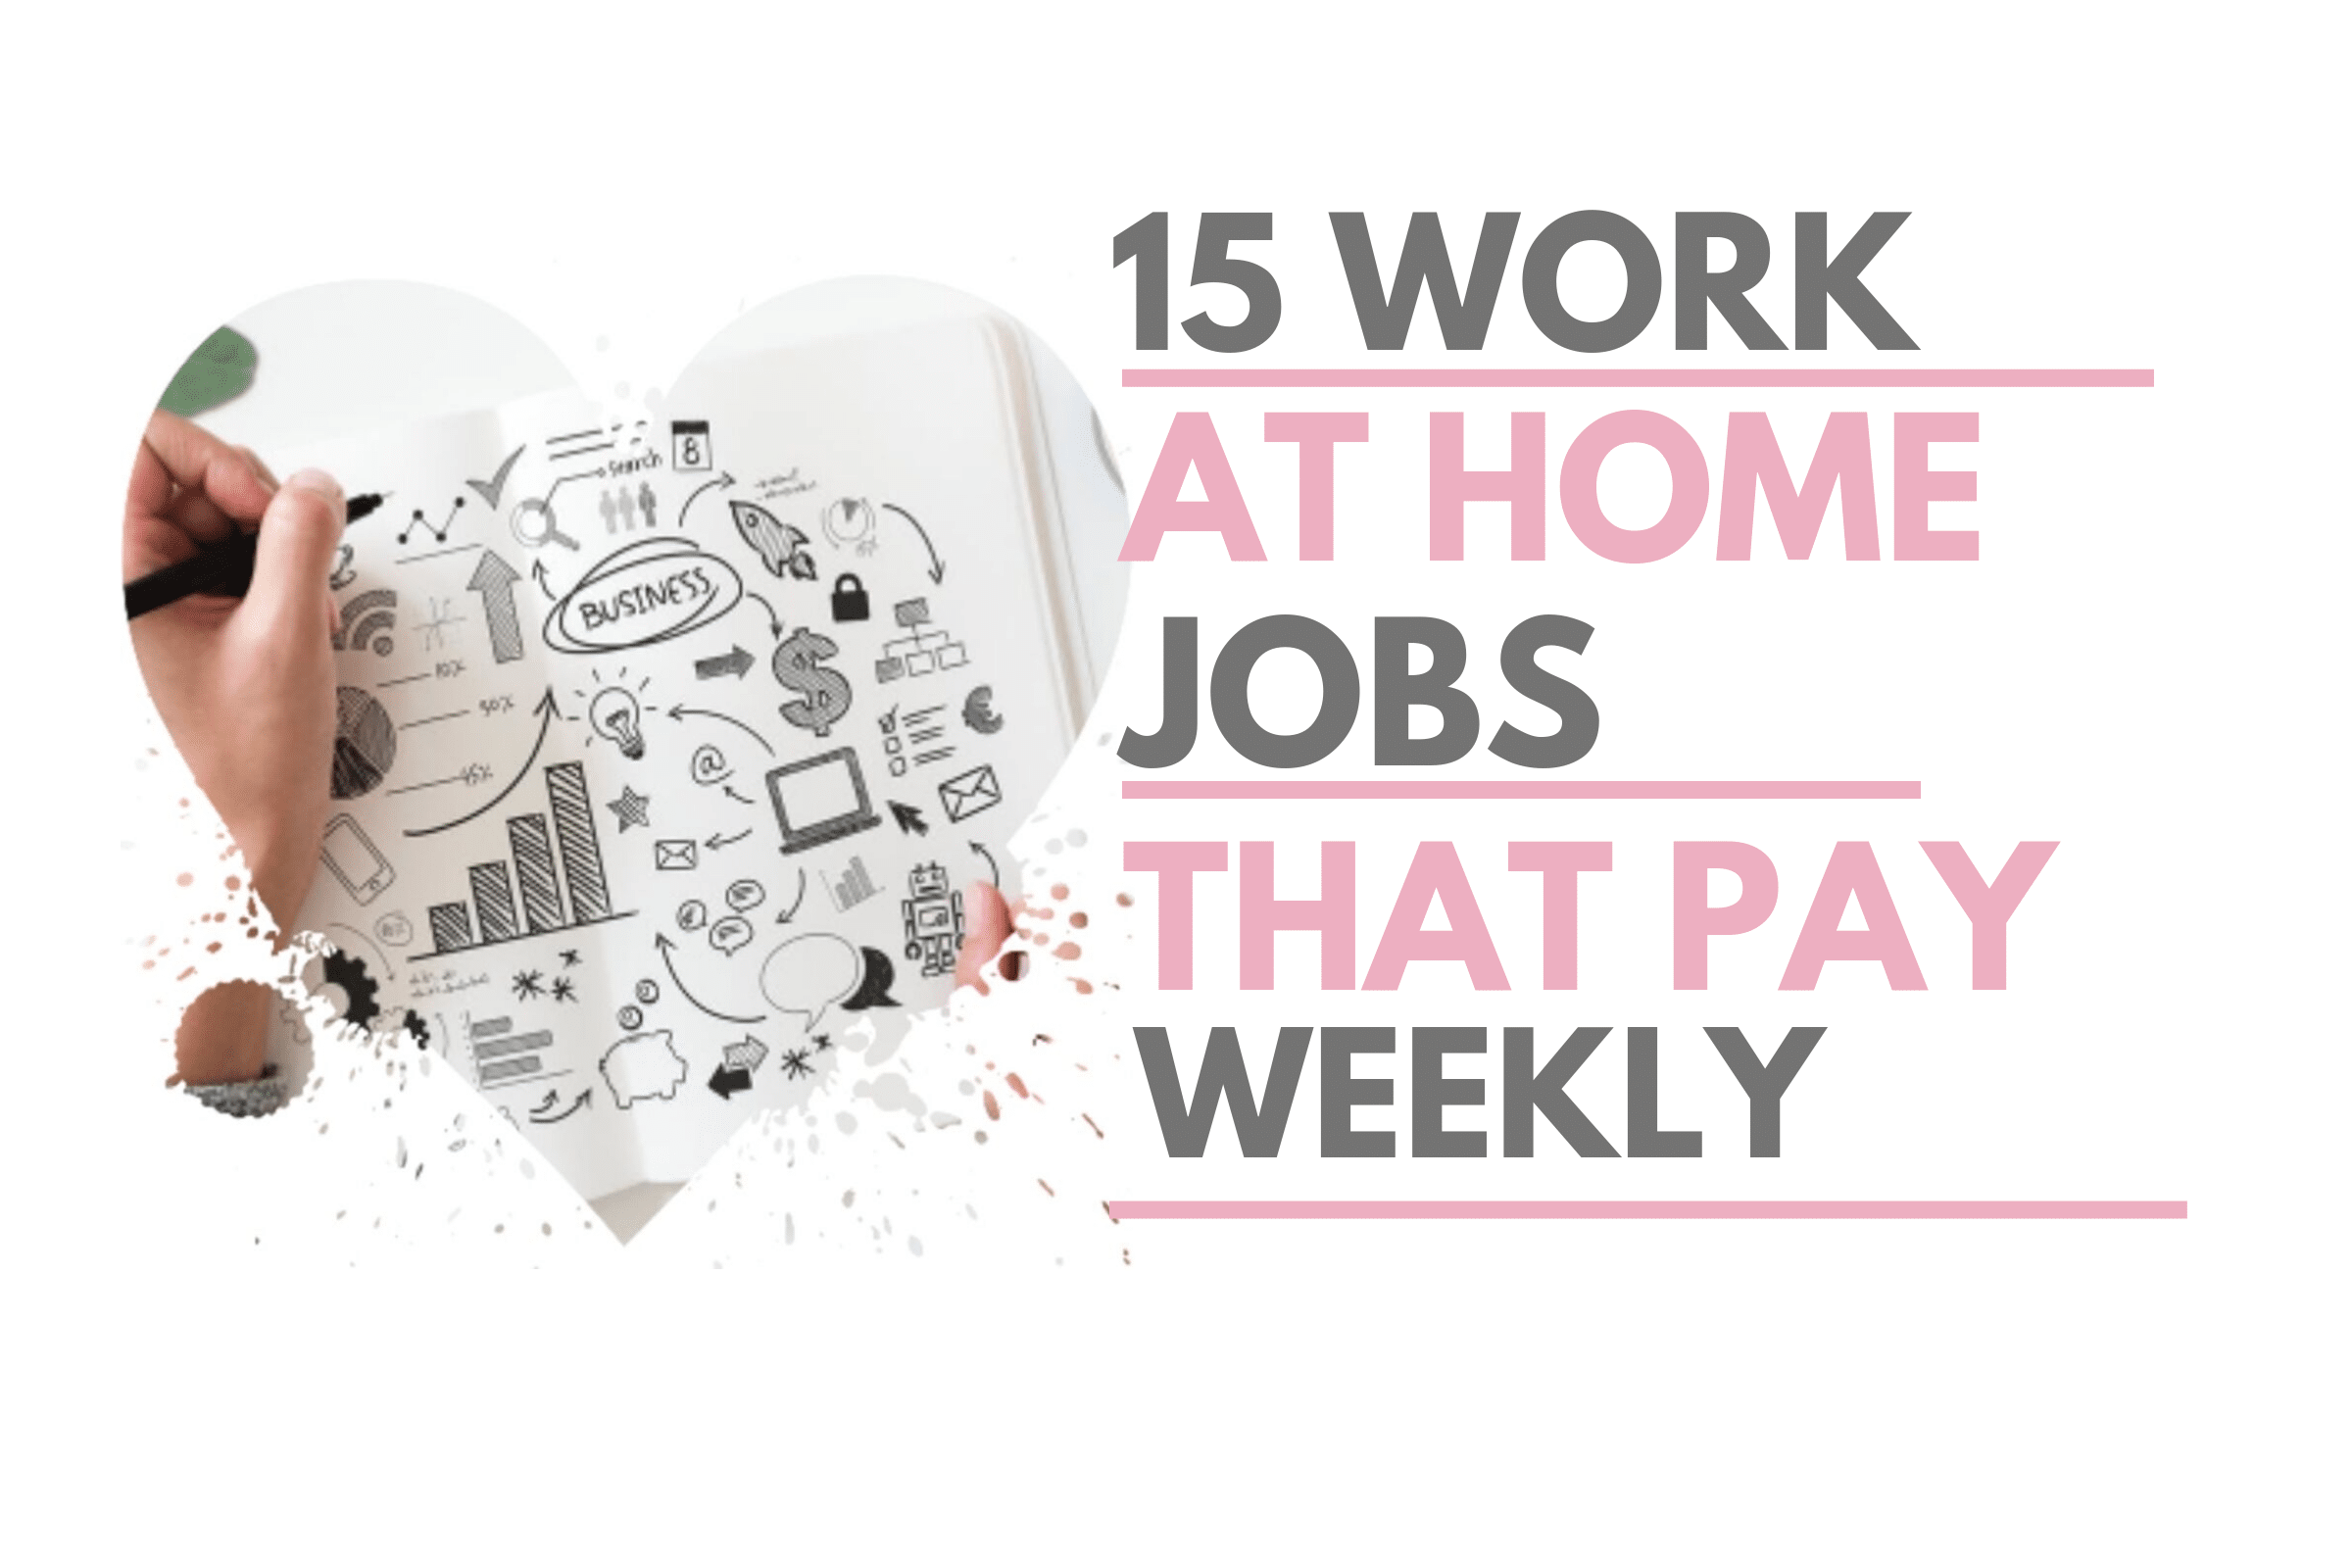 15 work at home jobs that pay weekly